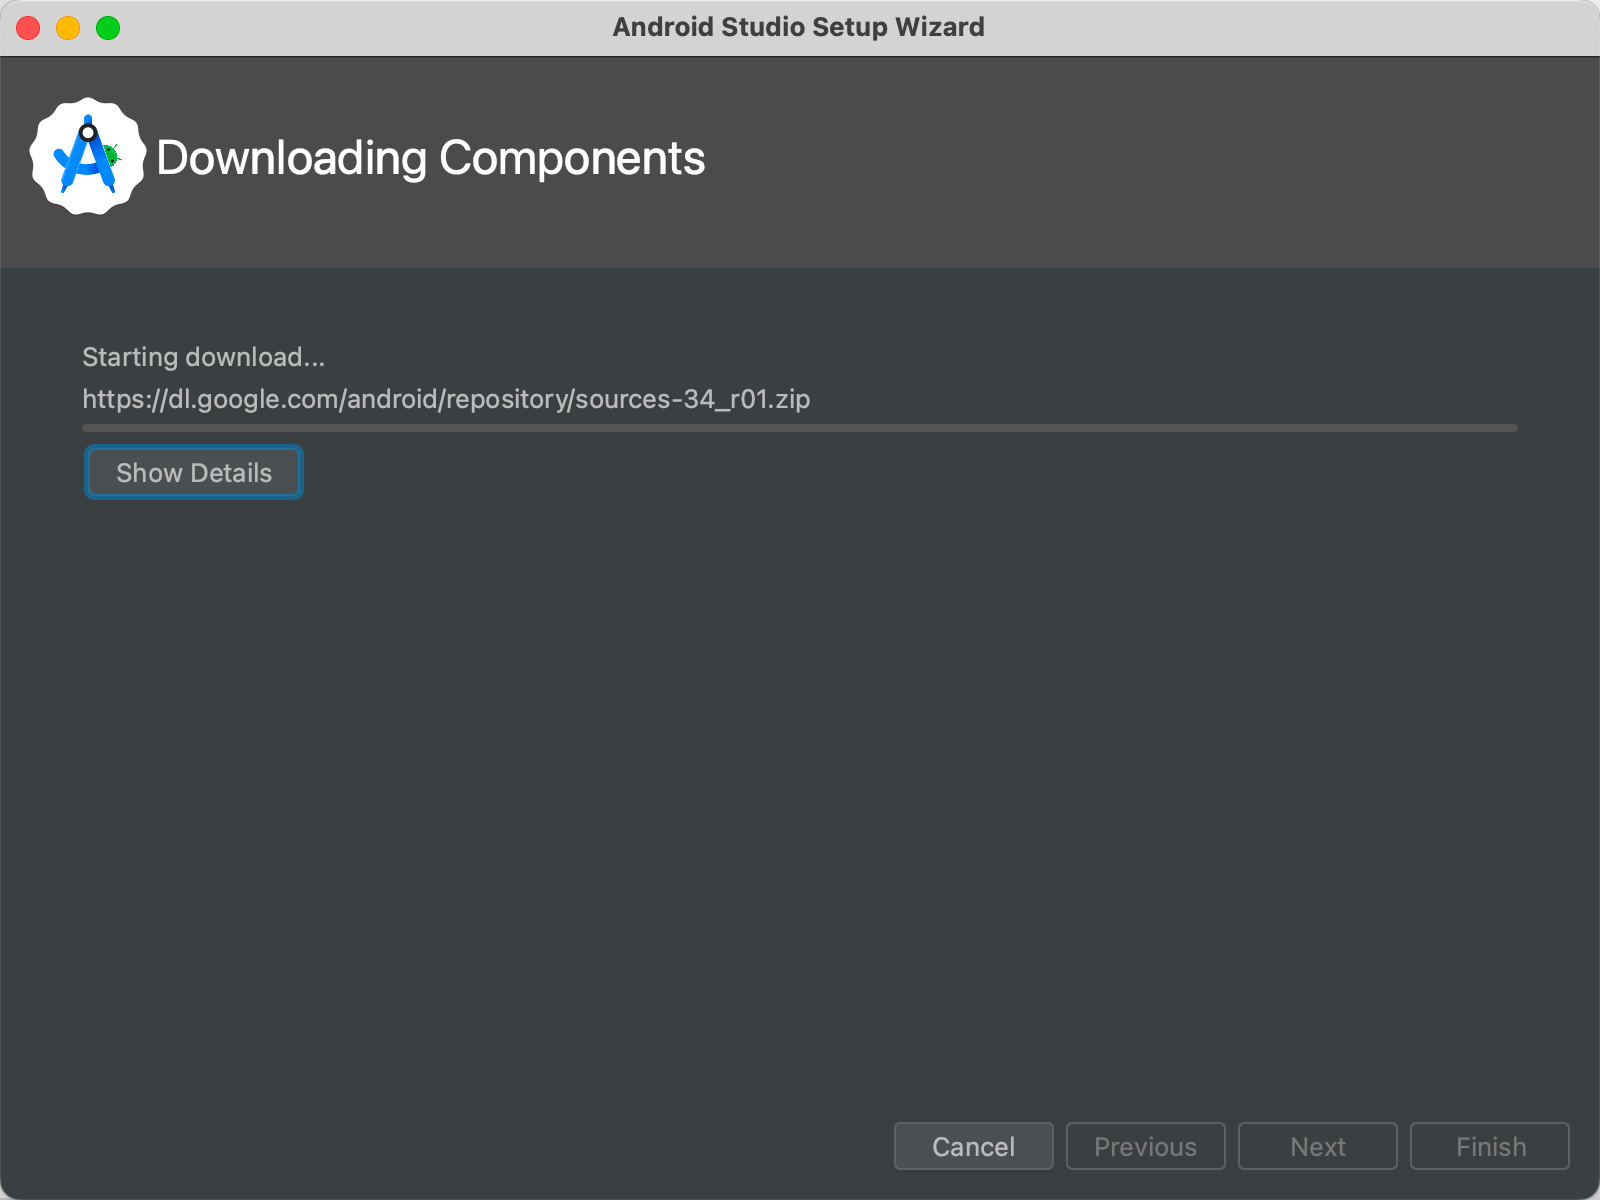 Downloading Components